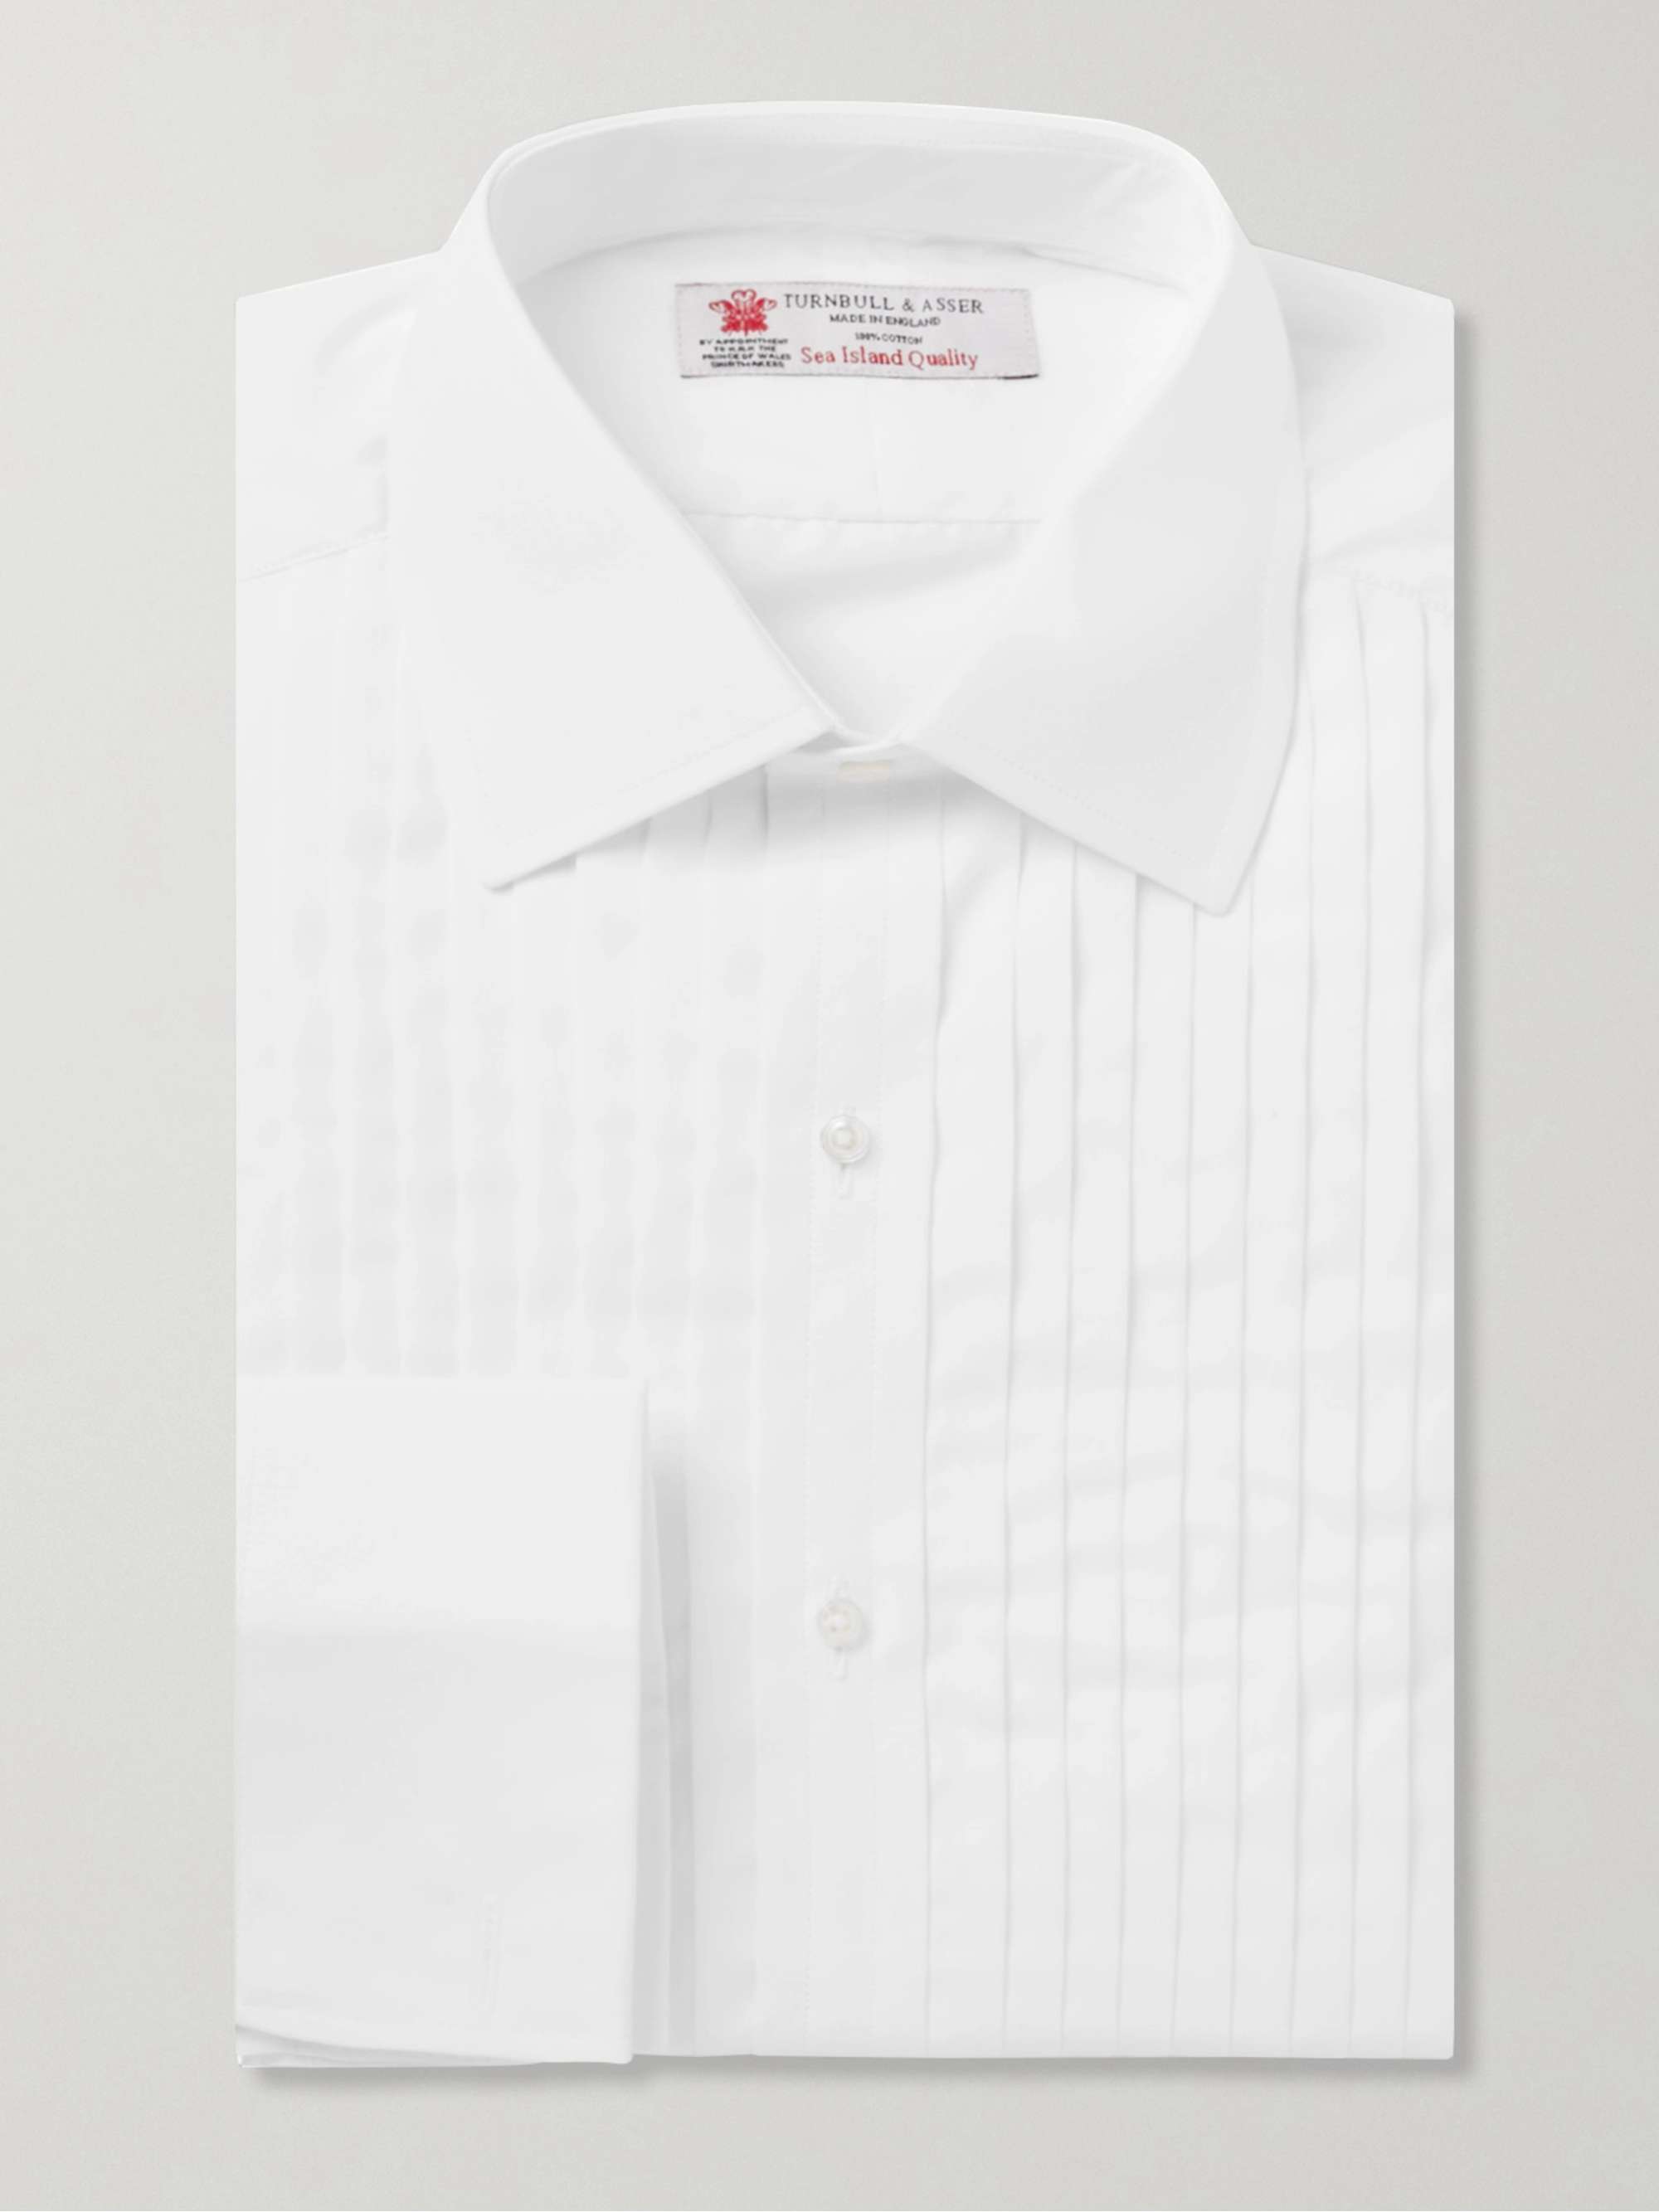 White with Black Dress Shirts Made in the USA 